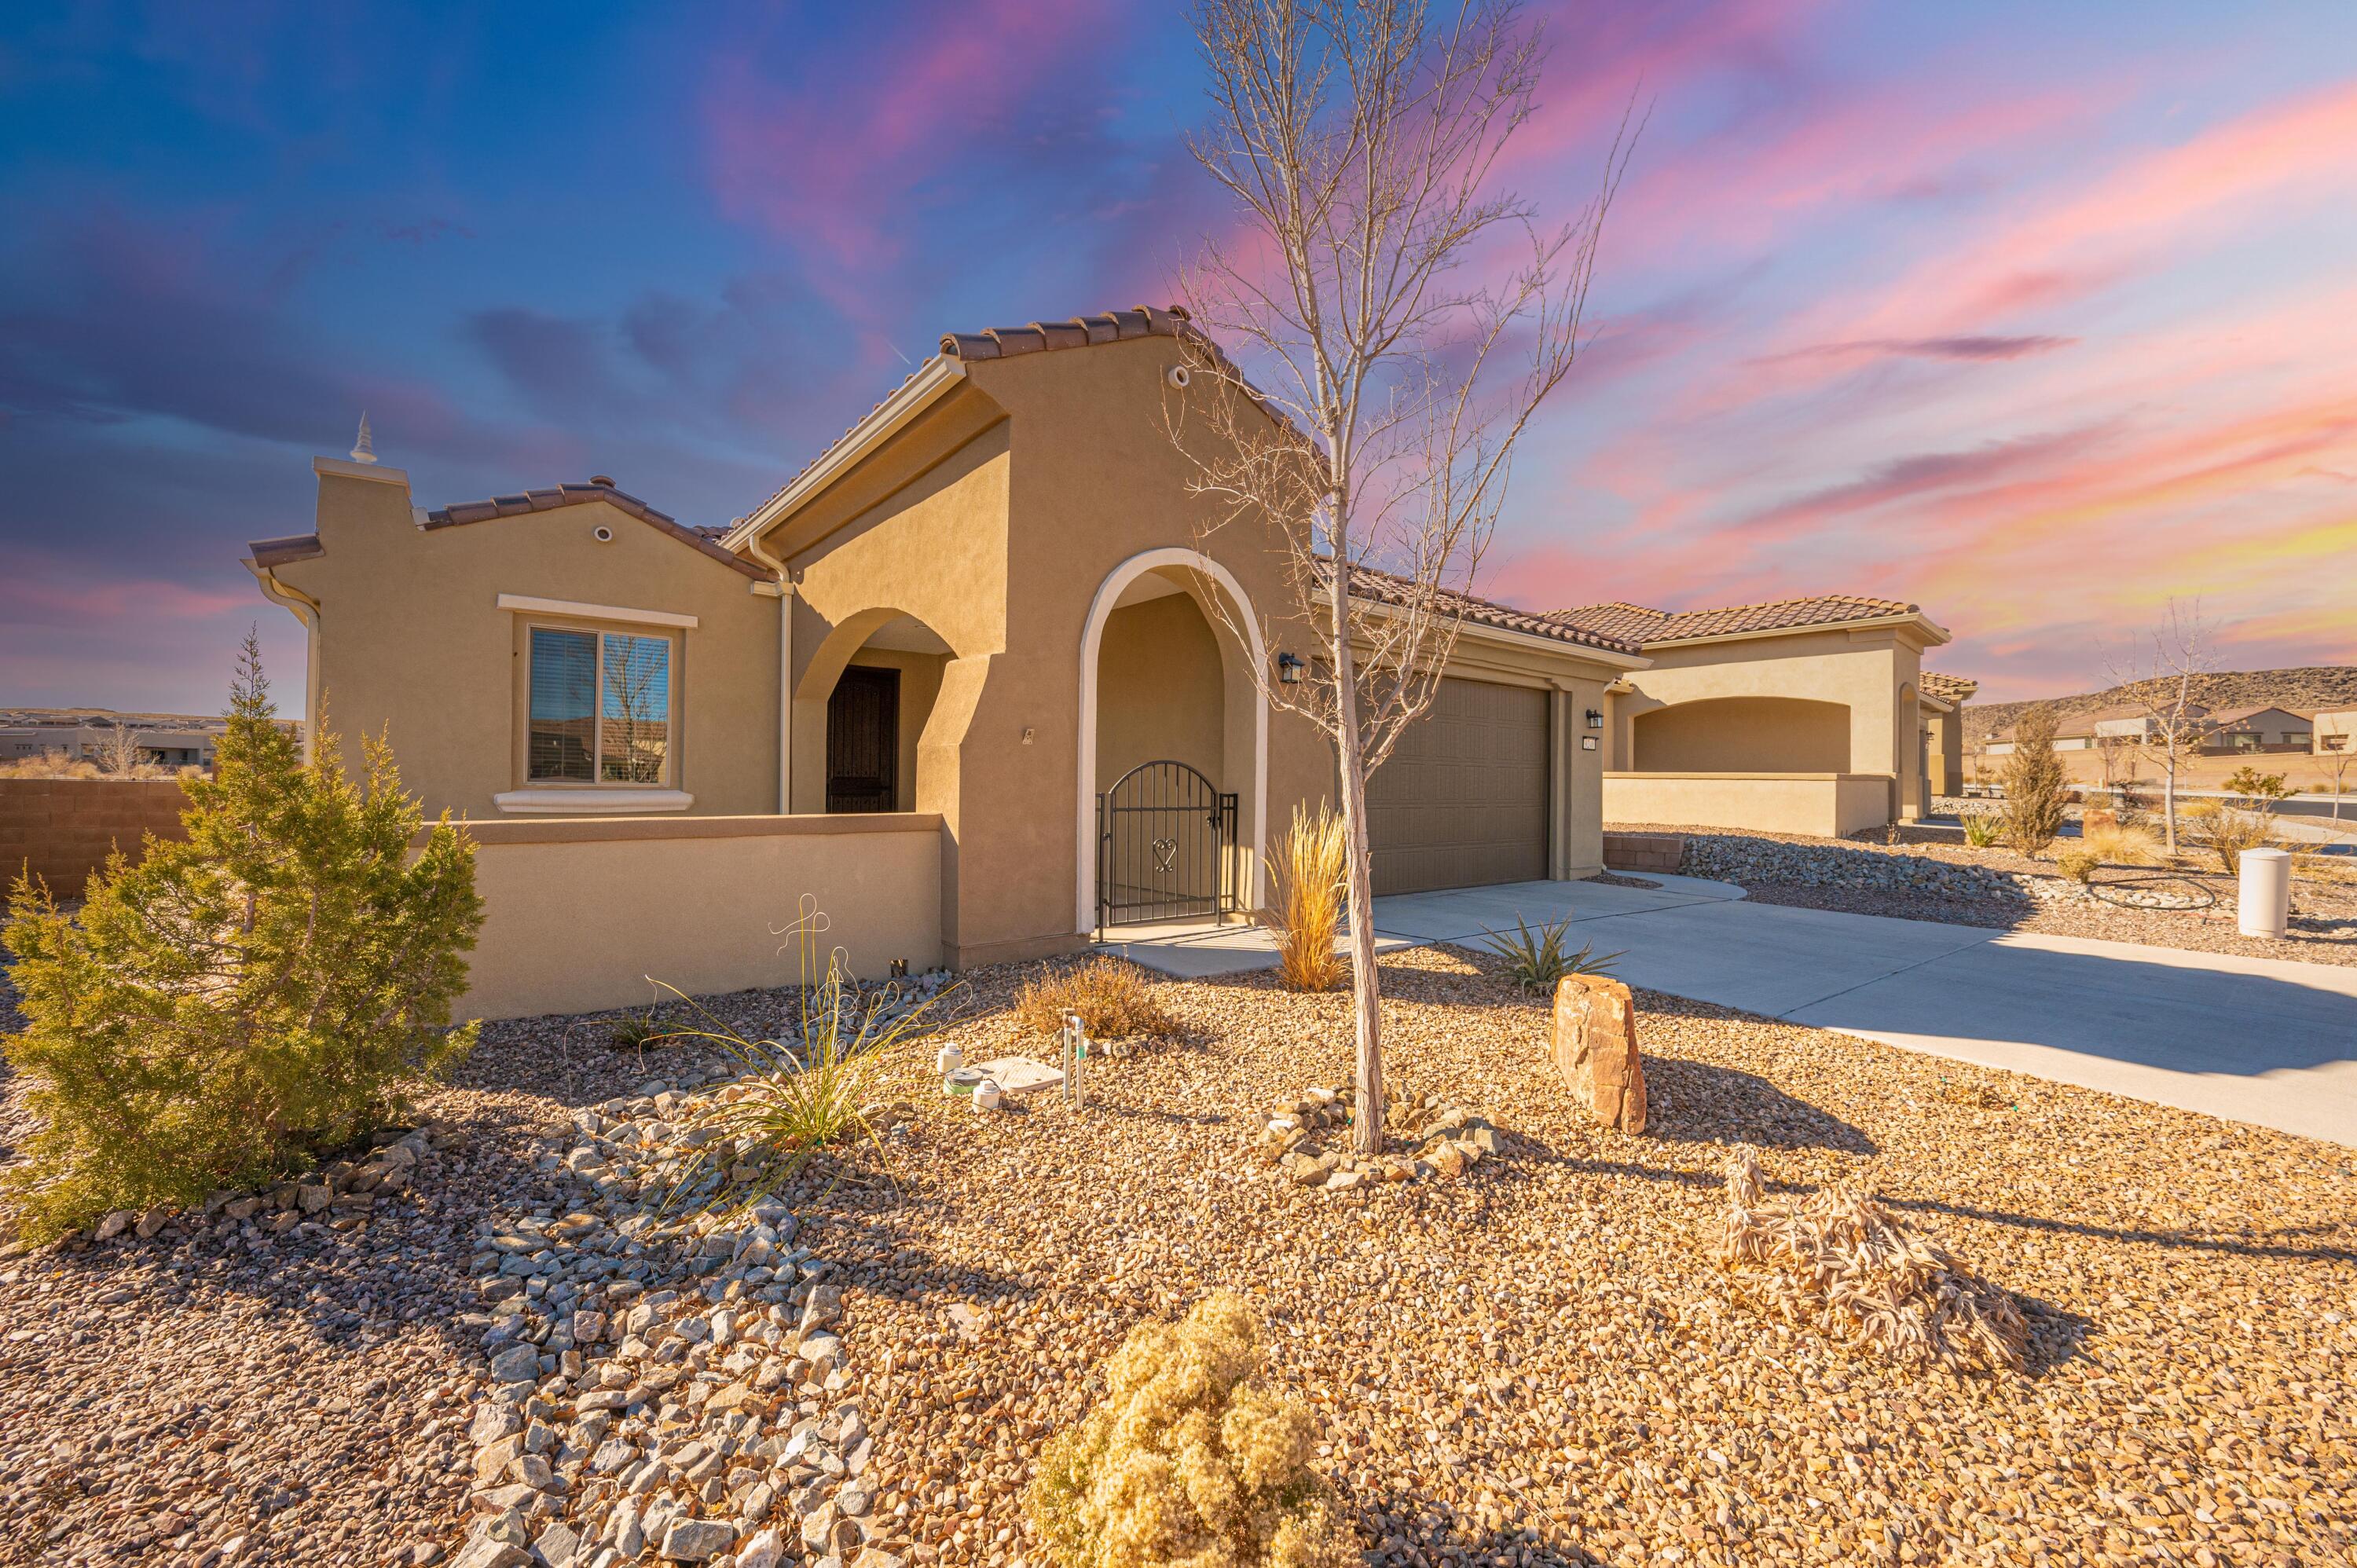 Welcome to Del Webb Mirehaven, a 55+ Active Adult Community! This 2019 built 'Sanctuary' floorplan has approx 1708 SF and is situated on a view lot! This home offers 2 BR's, 2 BA's, Chef's Kitchen w/ Large Island, Granite Counter-tops, beautiful back-splash, SS Appliances, REF AIR, Gas FP, Gorgeous ceramic floor tile, Extended 2 Car Garage with a large 10 X 11 storage space, Large Covered Patio, Professionally Landscaped front and backyard! You will love the views of the Petroglyphs and views of the city to the south and east! The Sandia Amenity Center offers daily activities, Upscale Gym, Cafe, Tennis Courts, Pickle Ball, Locker Rooms, Beautiful Pool, daily activities and so much more!!!